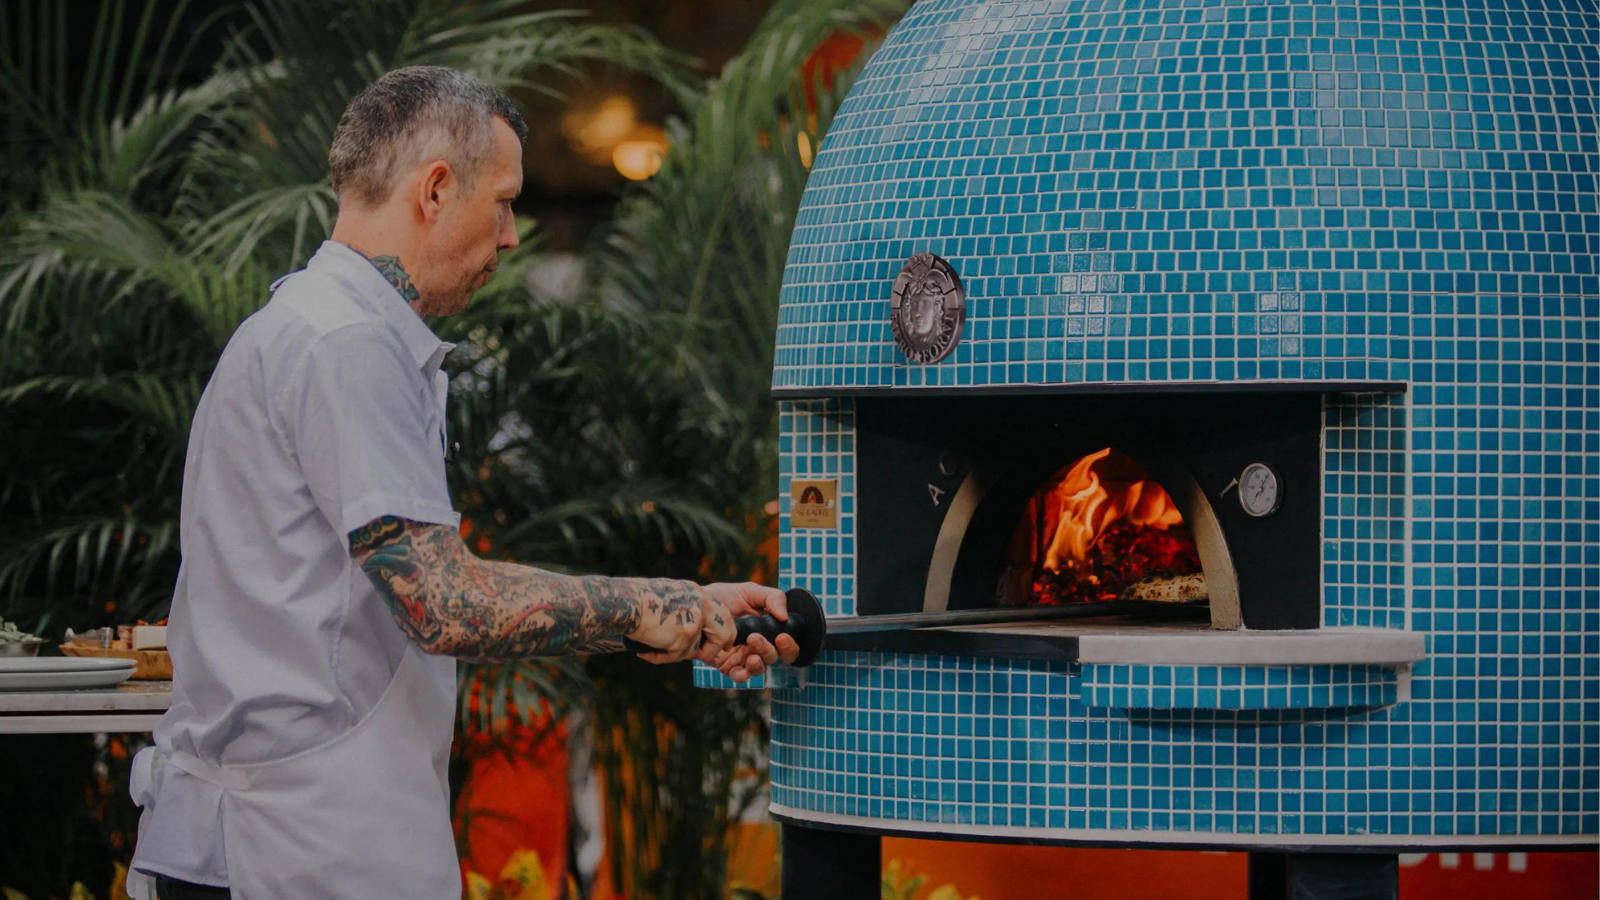 Chef in white apron and tatoos is outside inserting a pizza into a blue mosaic tile Fiero wood-fired pizza oven.